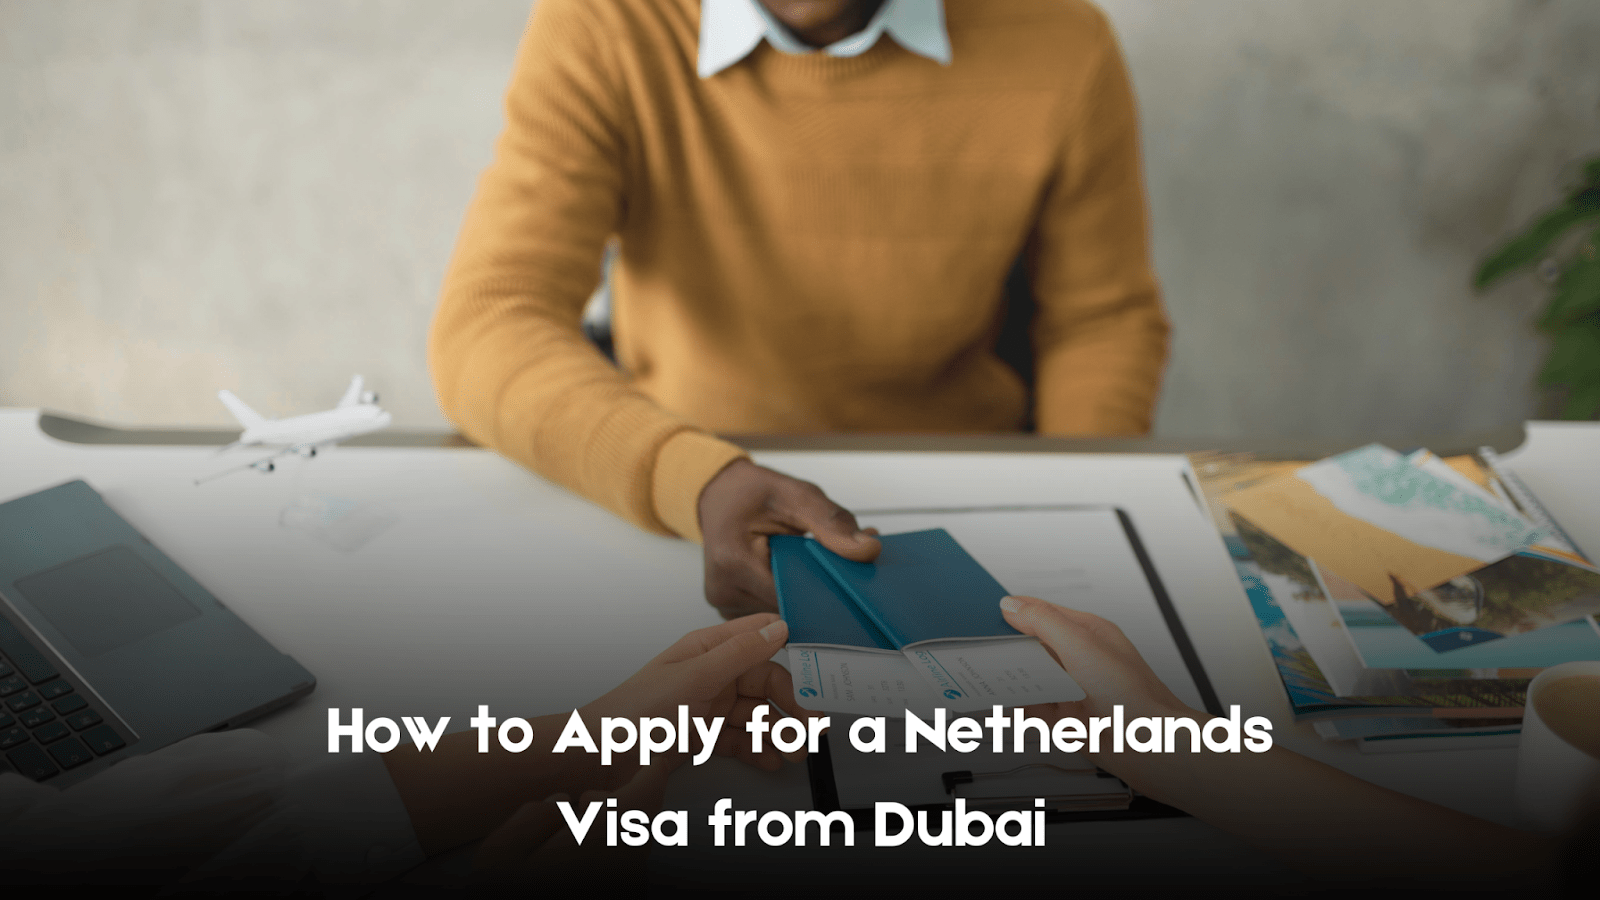 How to Apply for a Netherlands Visa from Dubai?